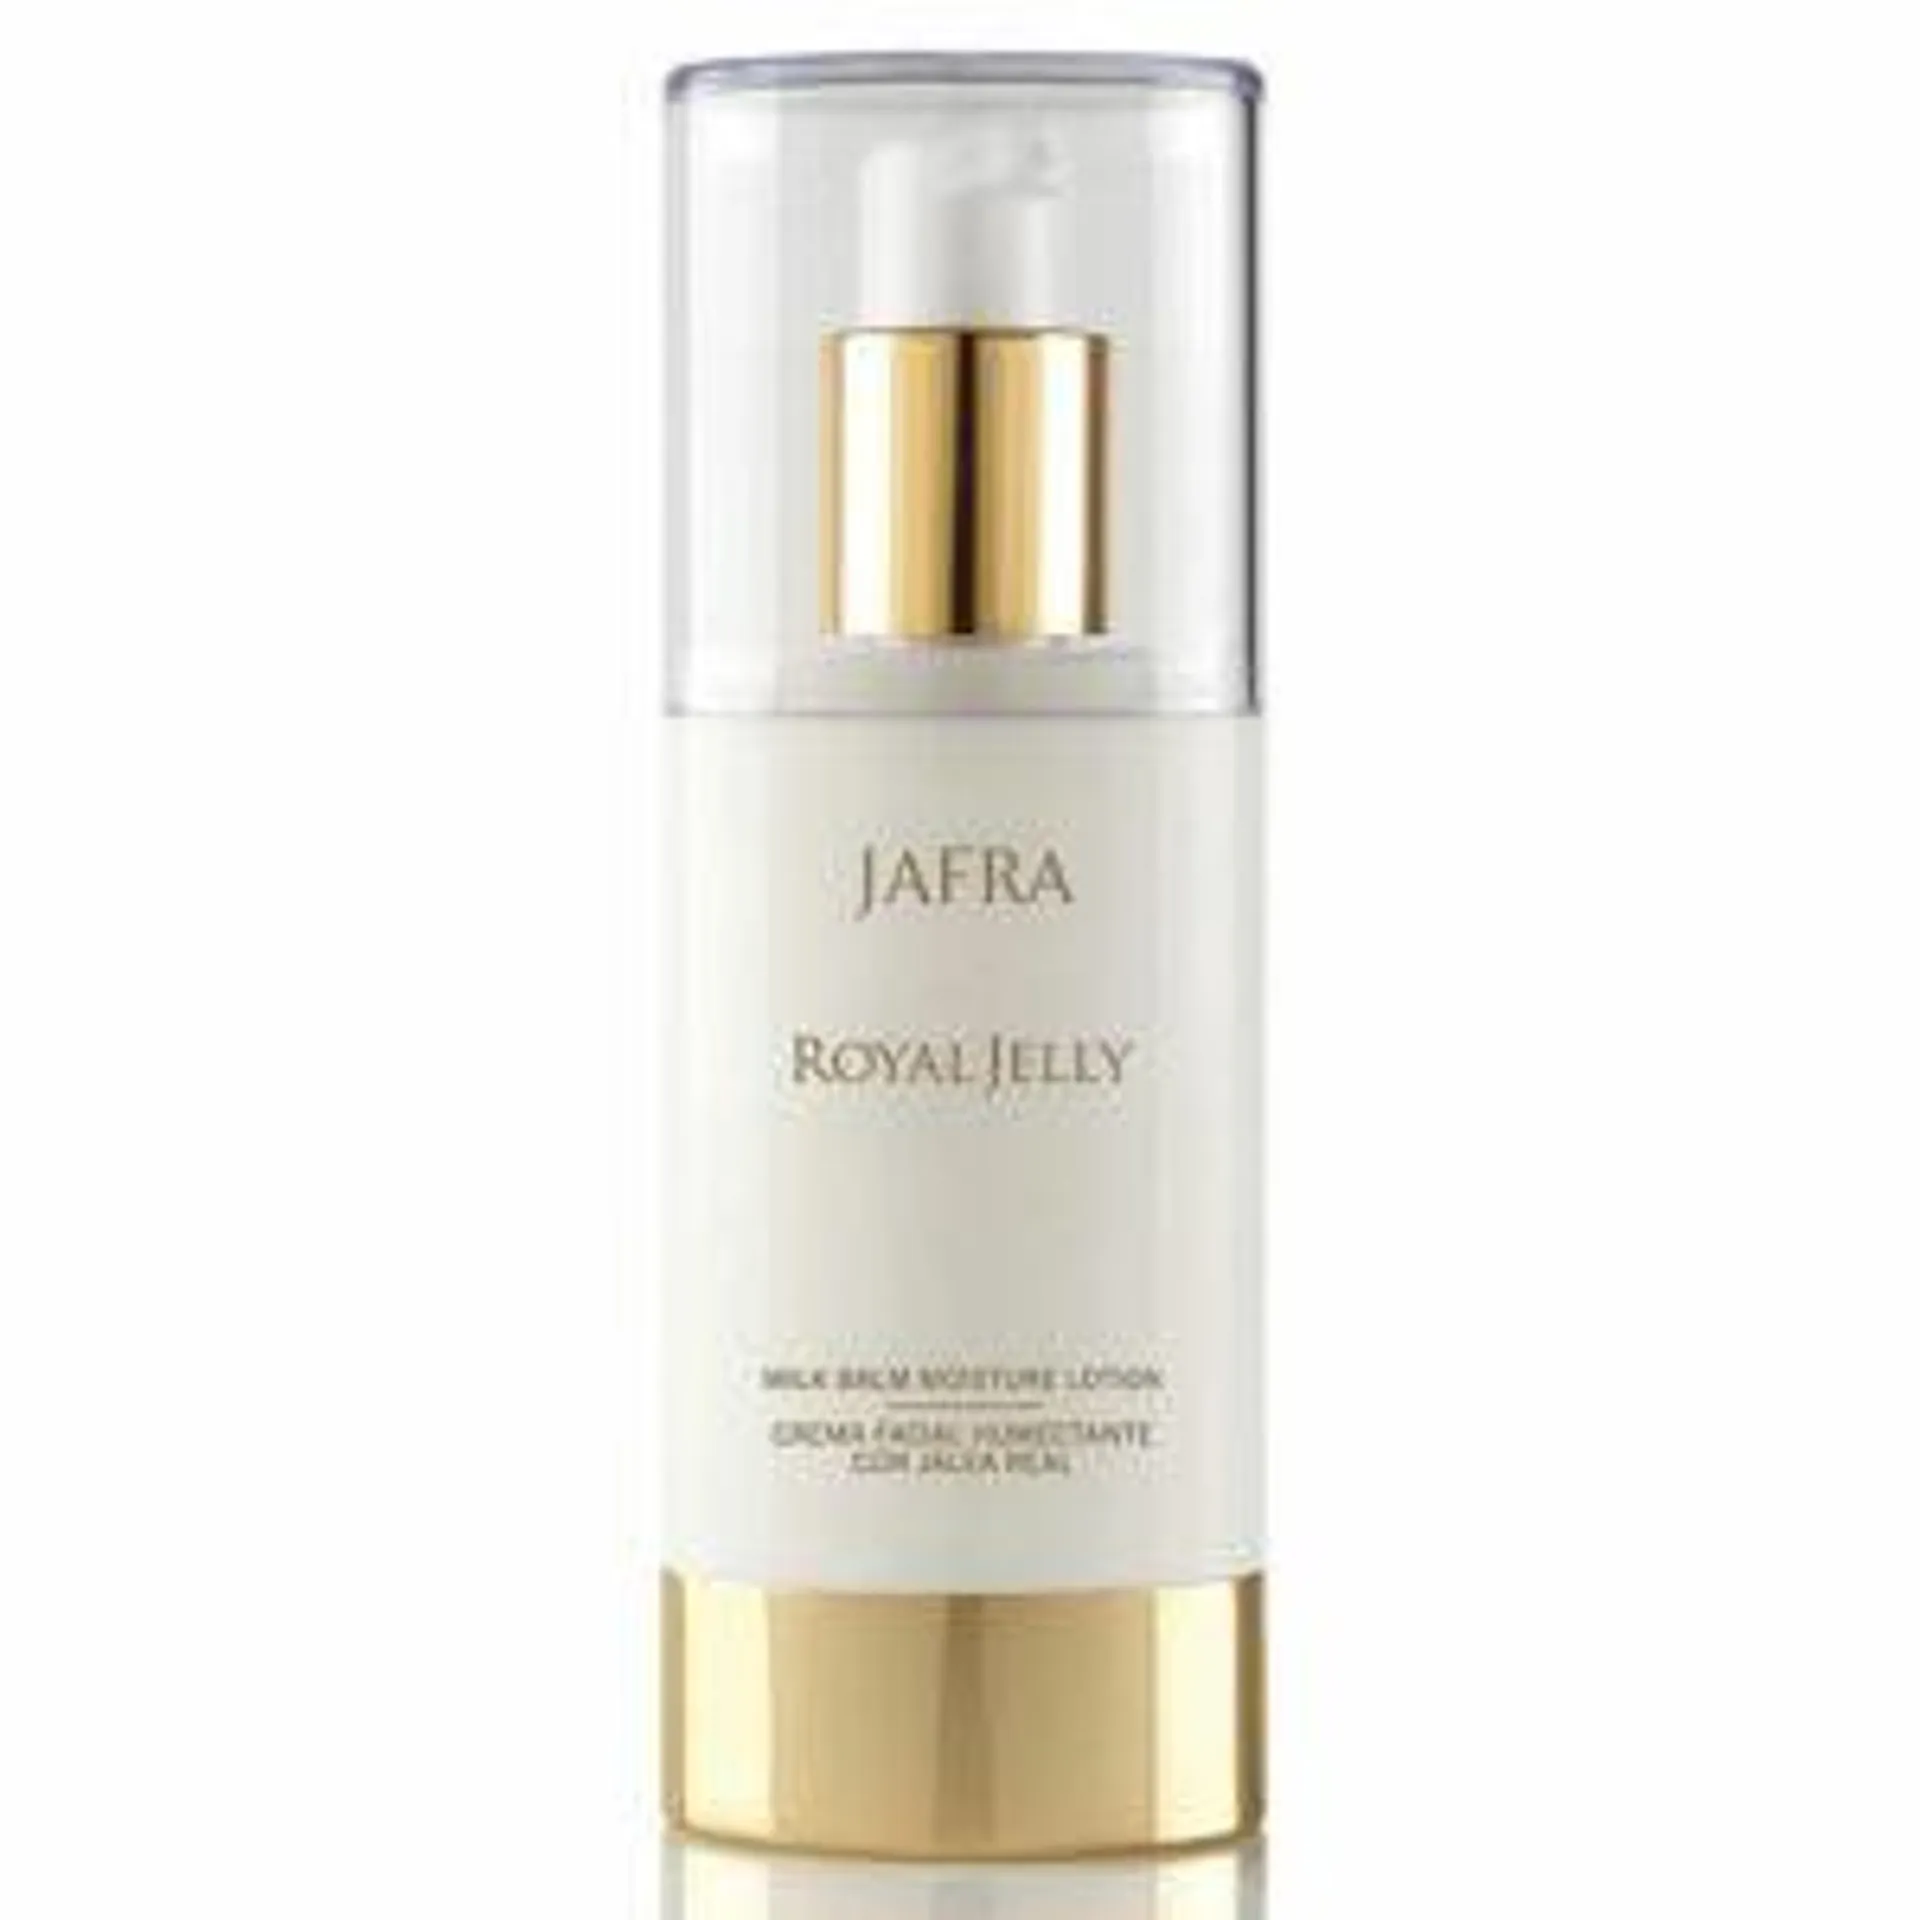 JAFRA ROYAL Jelly Crema Facial Humectante con Jalea Real